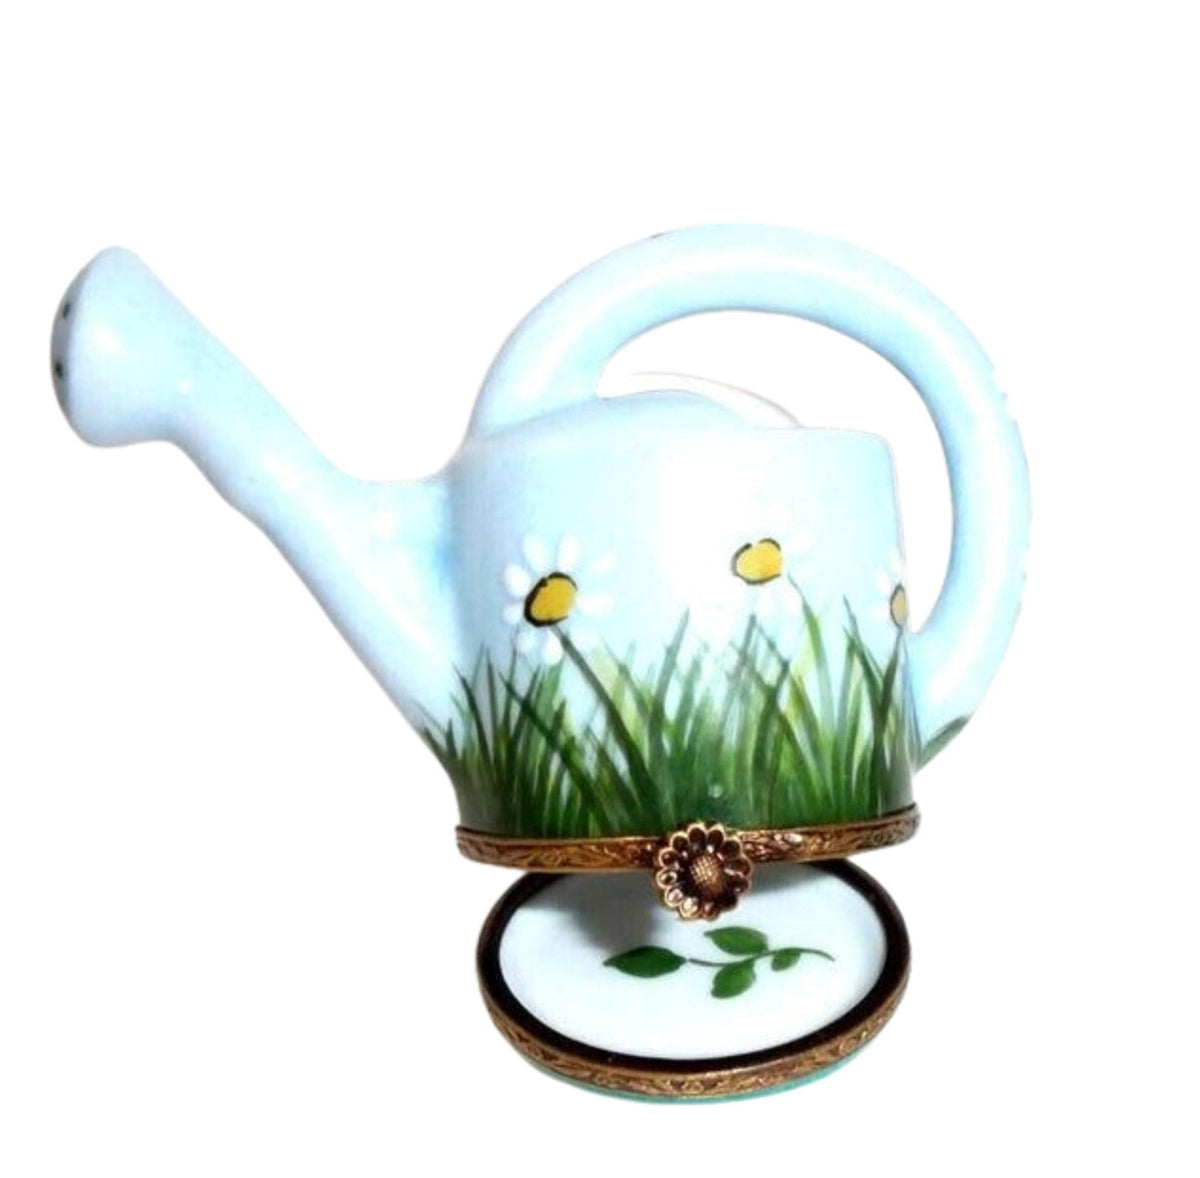 Decorative watering can featuring cheerful daisy design